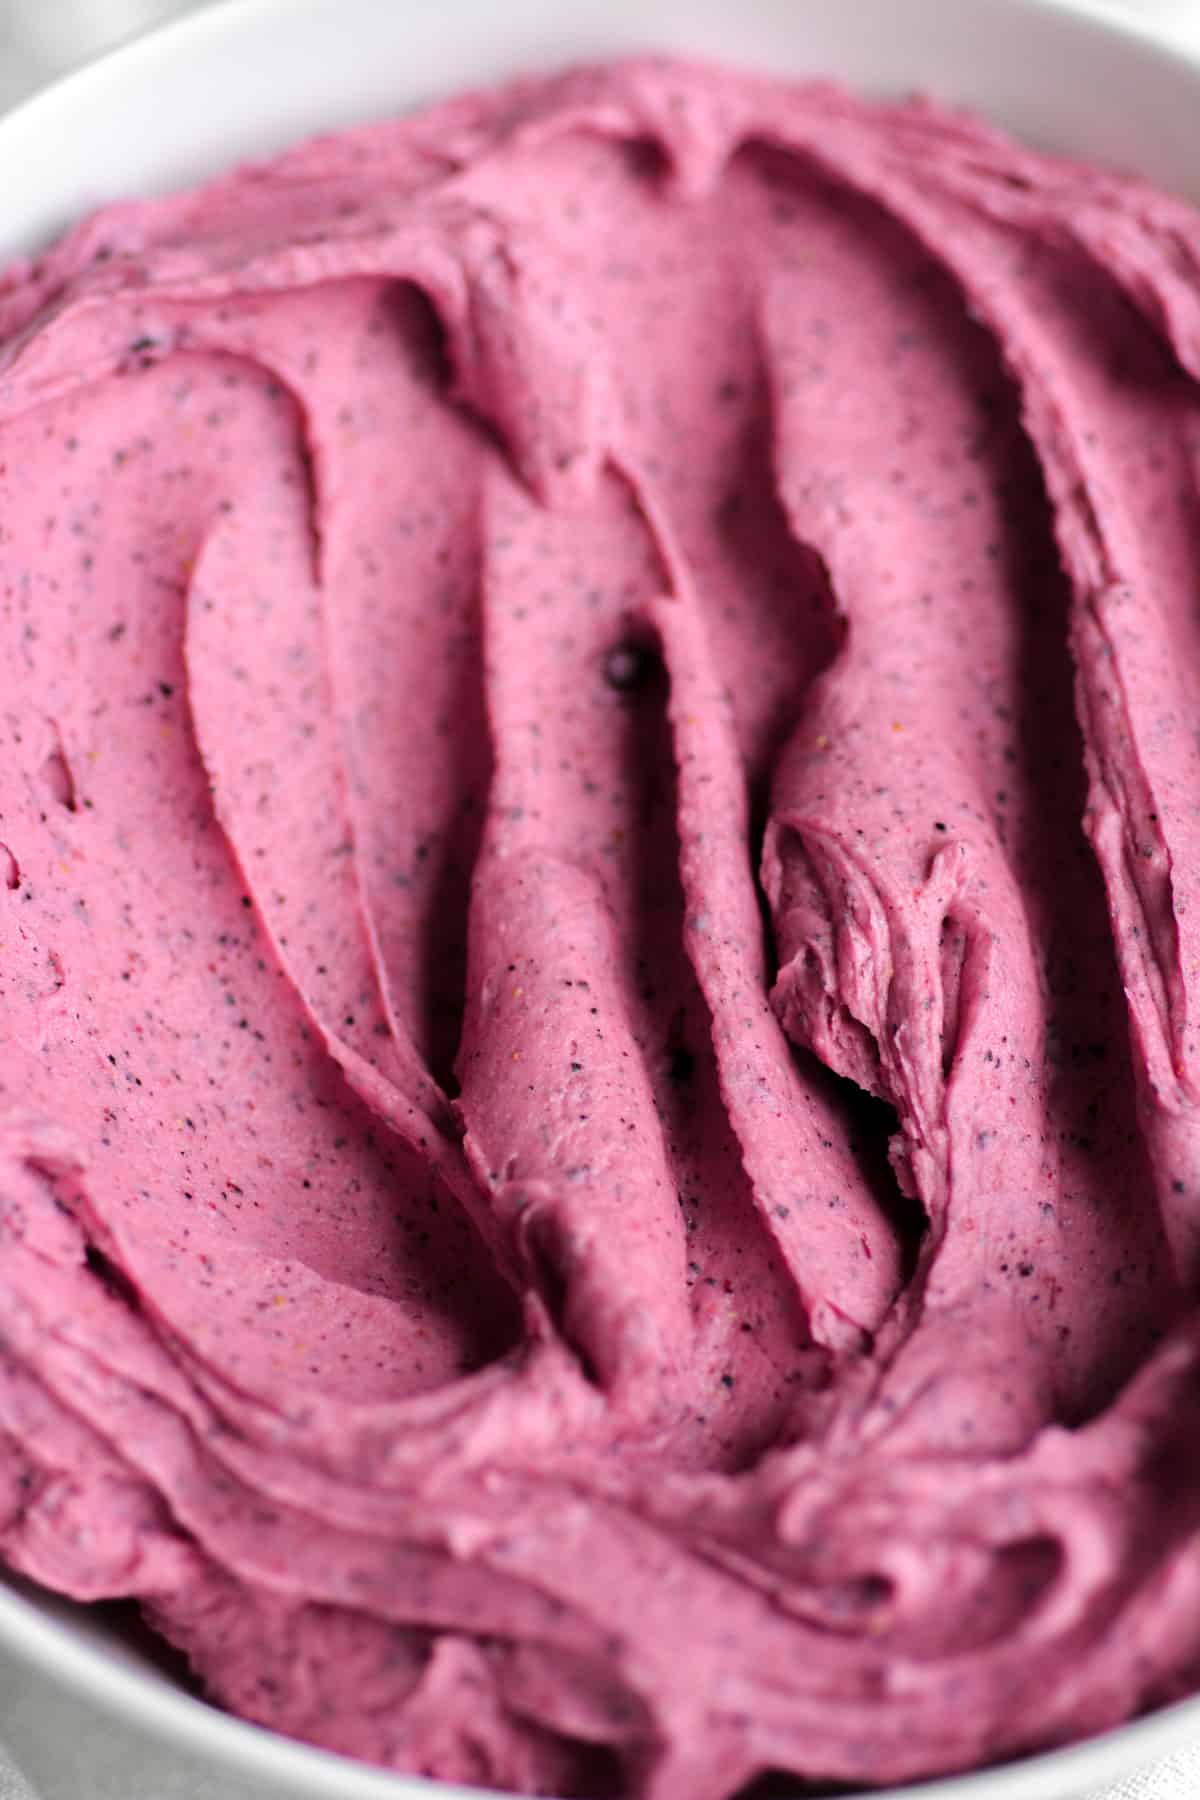 Blueberry buttercream frosting in a bowl.